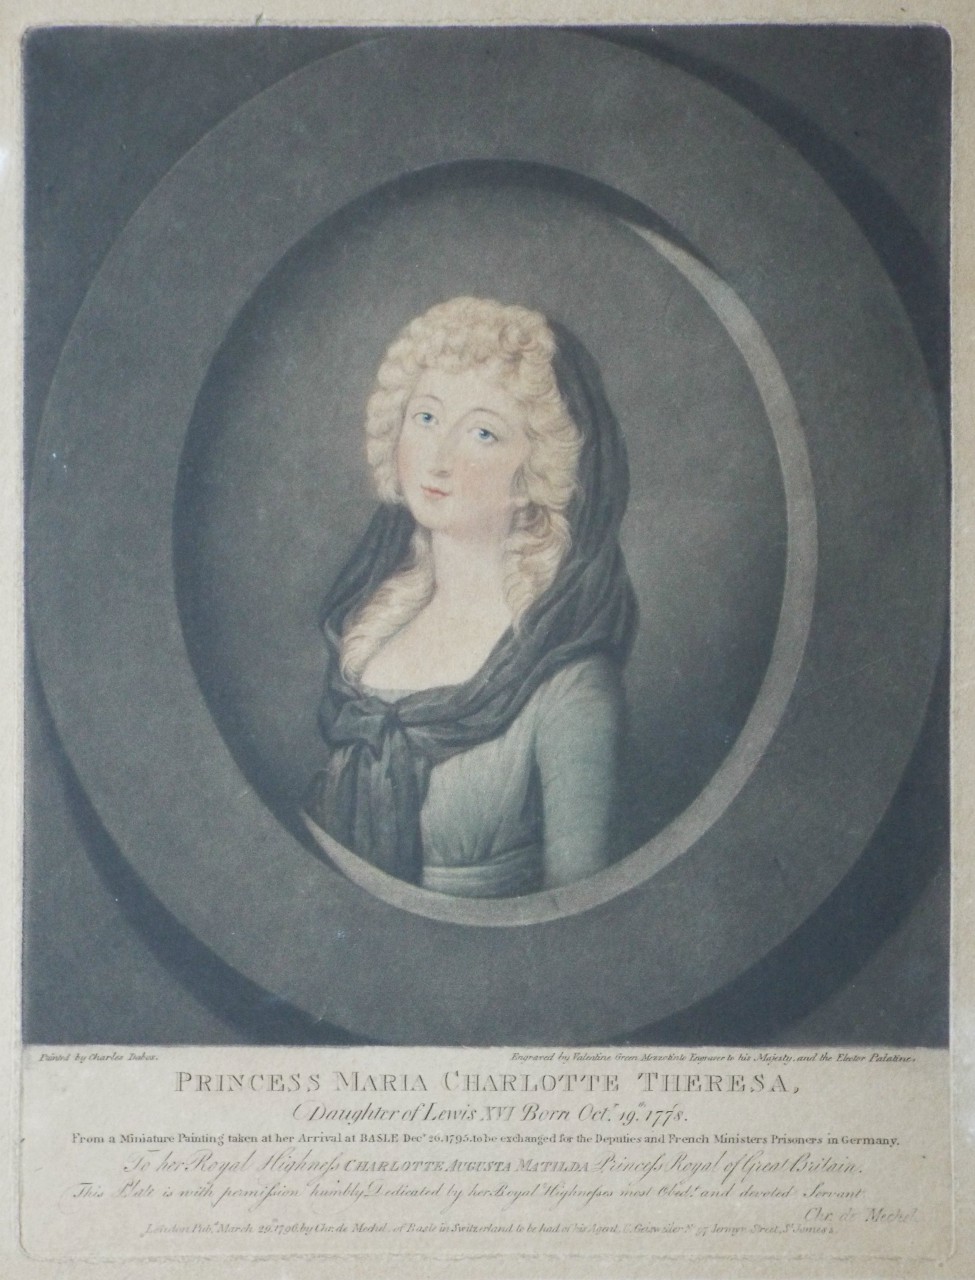 Mezzotint - Princess Maria Charlotte Theresa, Daughter of Lewis XVI Born Oct.r 19th 1778.From a Miniature Painting taken at her Arrival at Basle Dec.r 26, 1795. to be exchanged for the Deputies and French Ministers Prisoners in Germany, To Her Royal Highness Charlotte Augusta Matilda Princess Royal of Great Britain, This Plate is with permission humbly Dedicated by her Royal Highnesses most Obed.t and devoted Servant, Chr. de Mechel.  - Green